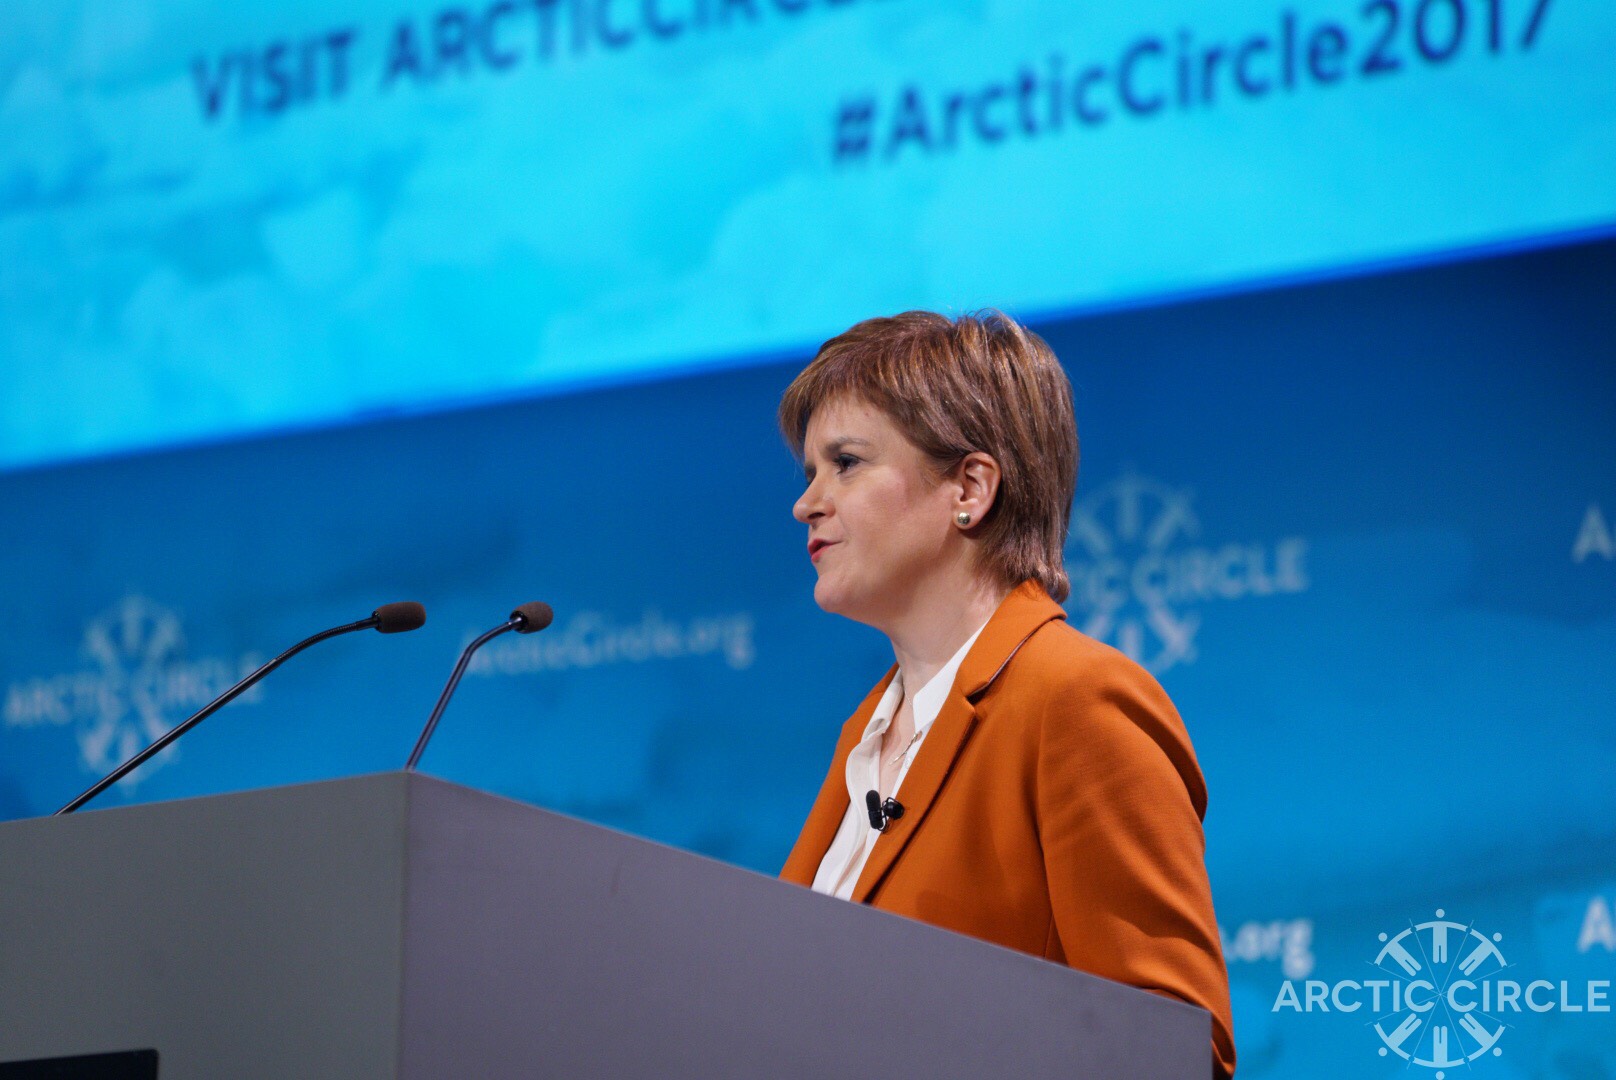 Scotland's First MInister Nicola Sturgeon, speaking at the Arctic Circle Assembly on Friday, October 13, 2017, said Arctic collaboration will bring economic benefits to both the region and to Scotland. (Oli Haukur Myrdal / The Arctic Circle)